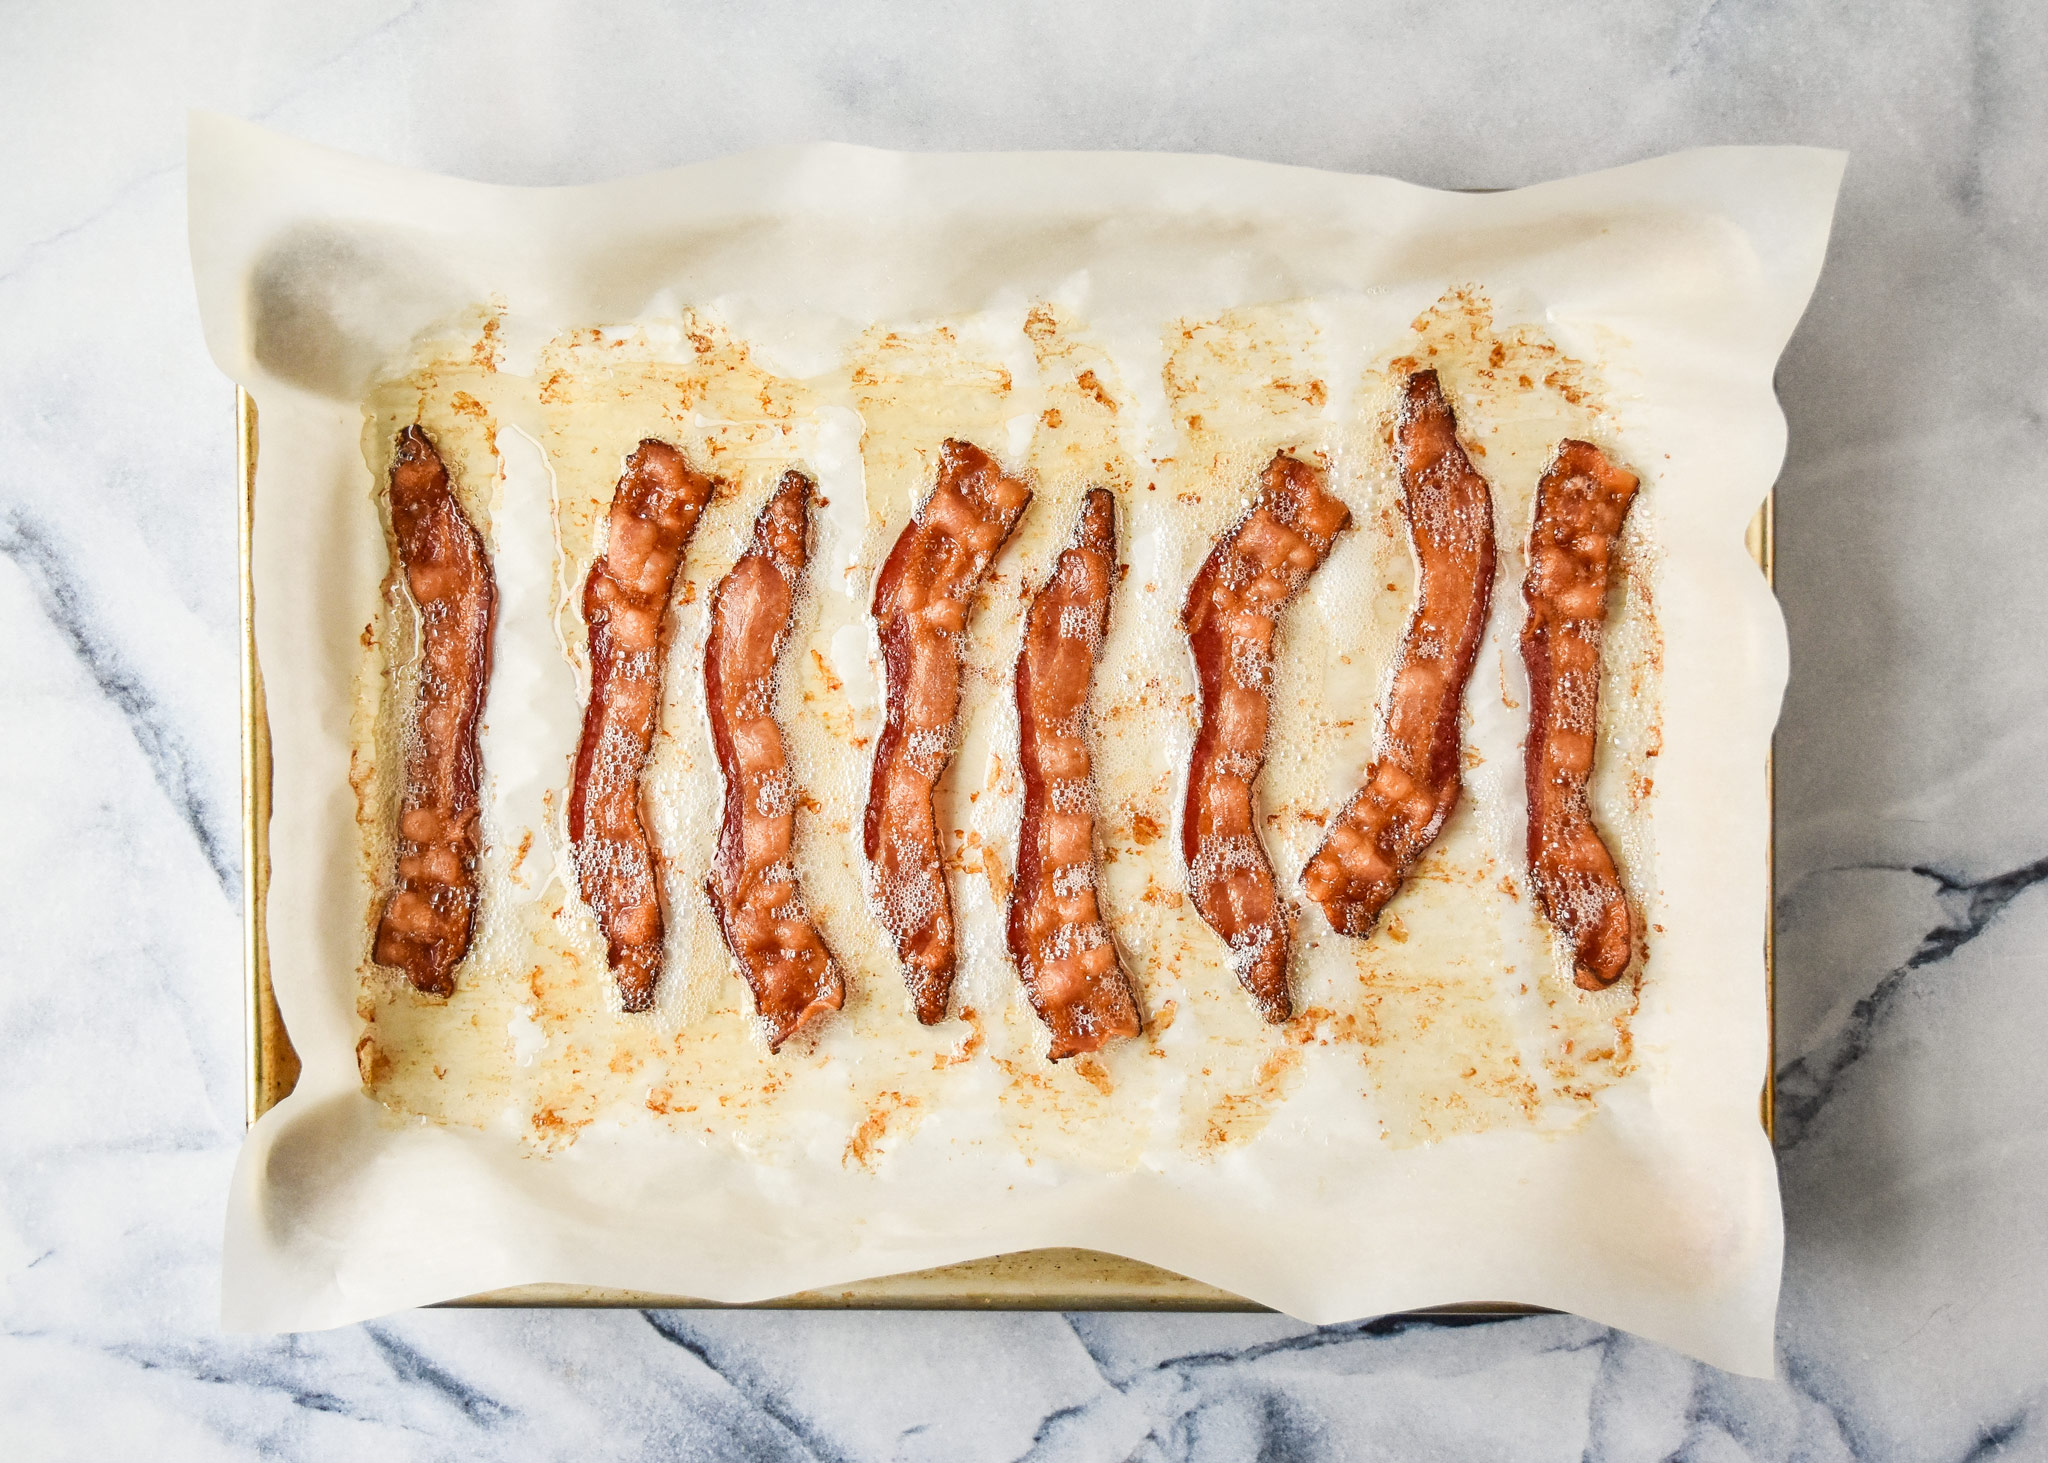 cooked bacon on parchment paper made in the oven